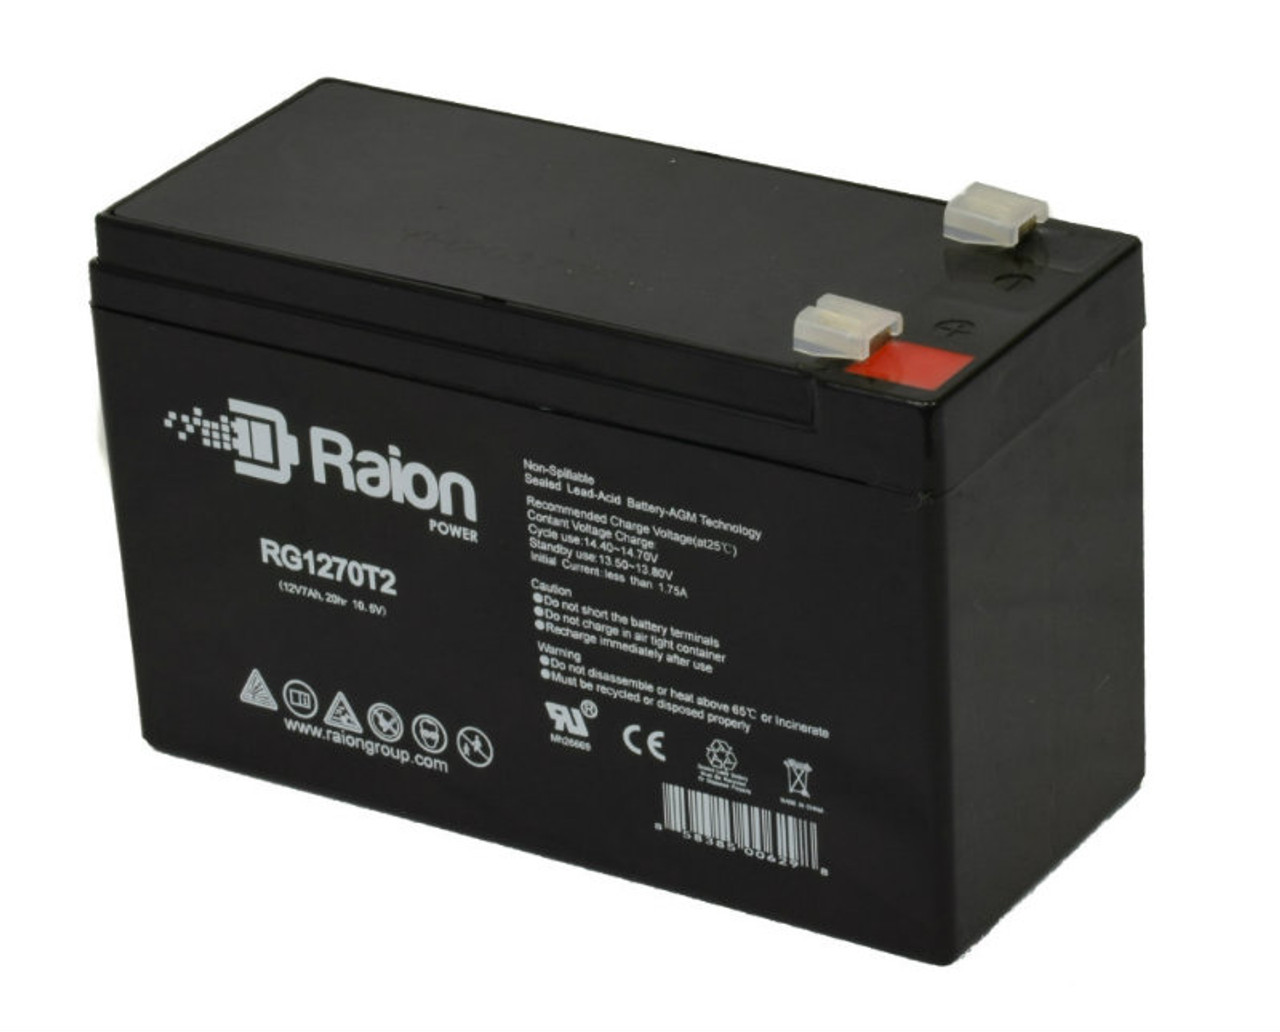 Raion Power Replacement 12V 7Ah Battery for Cyclops Spotlight CYC-BPS1500 - 1 Pack